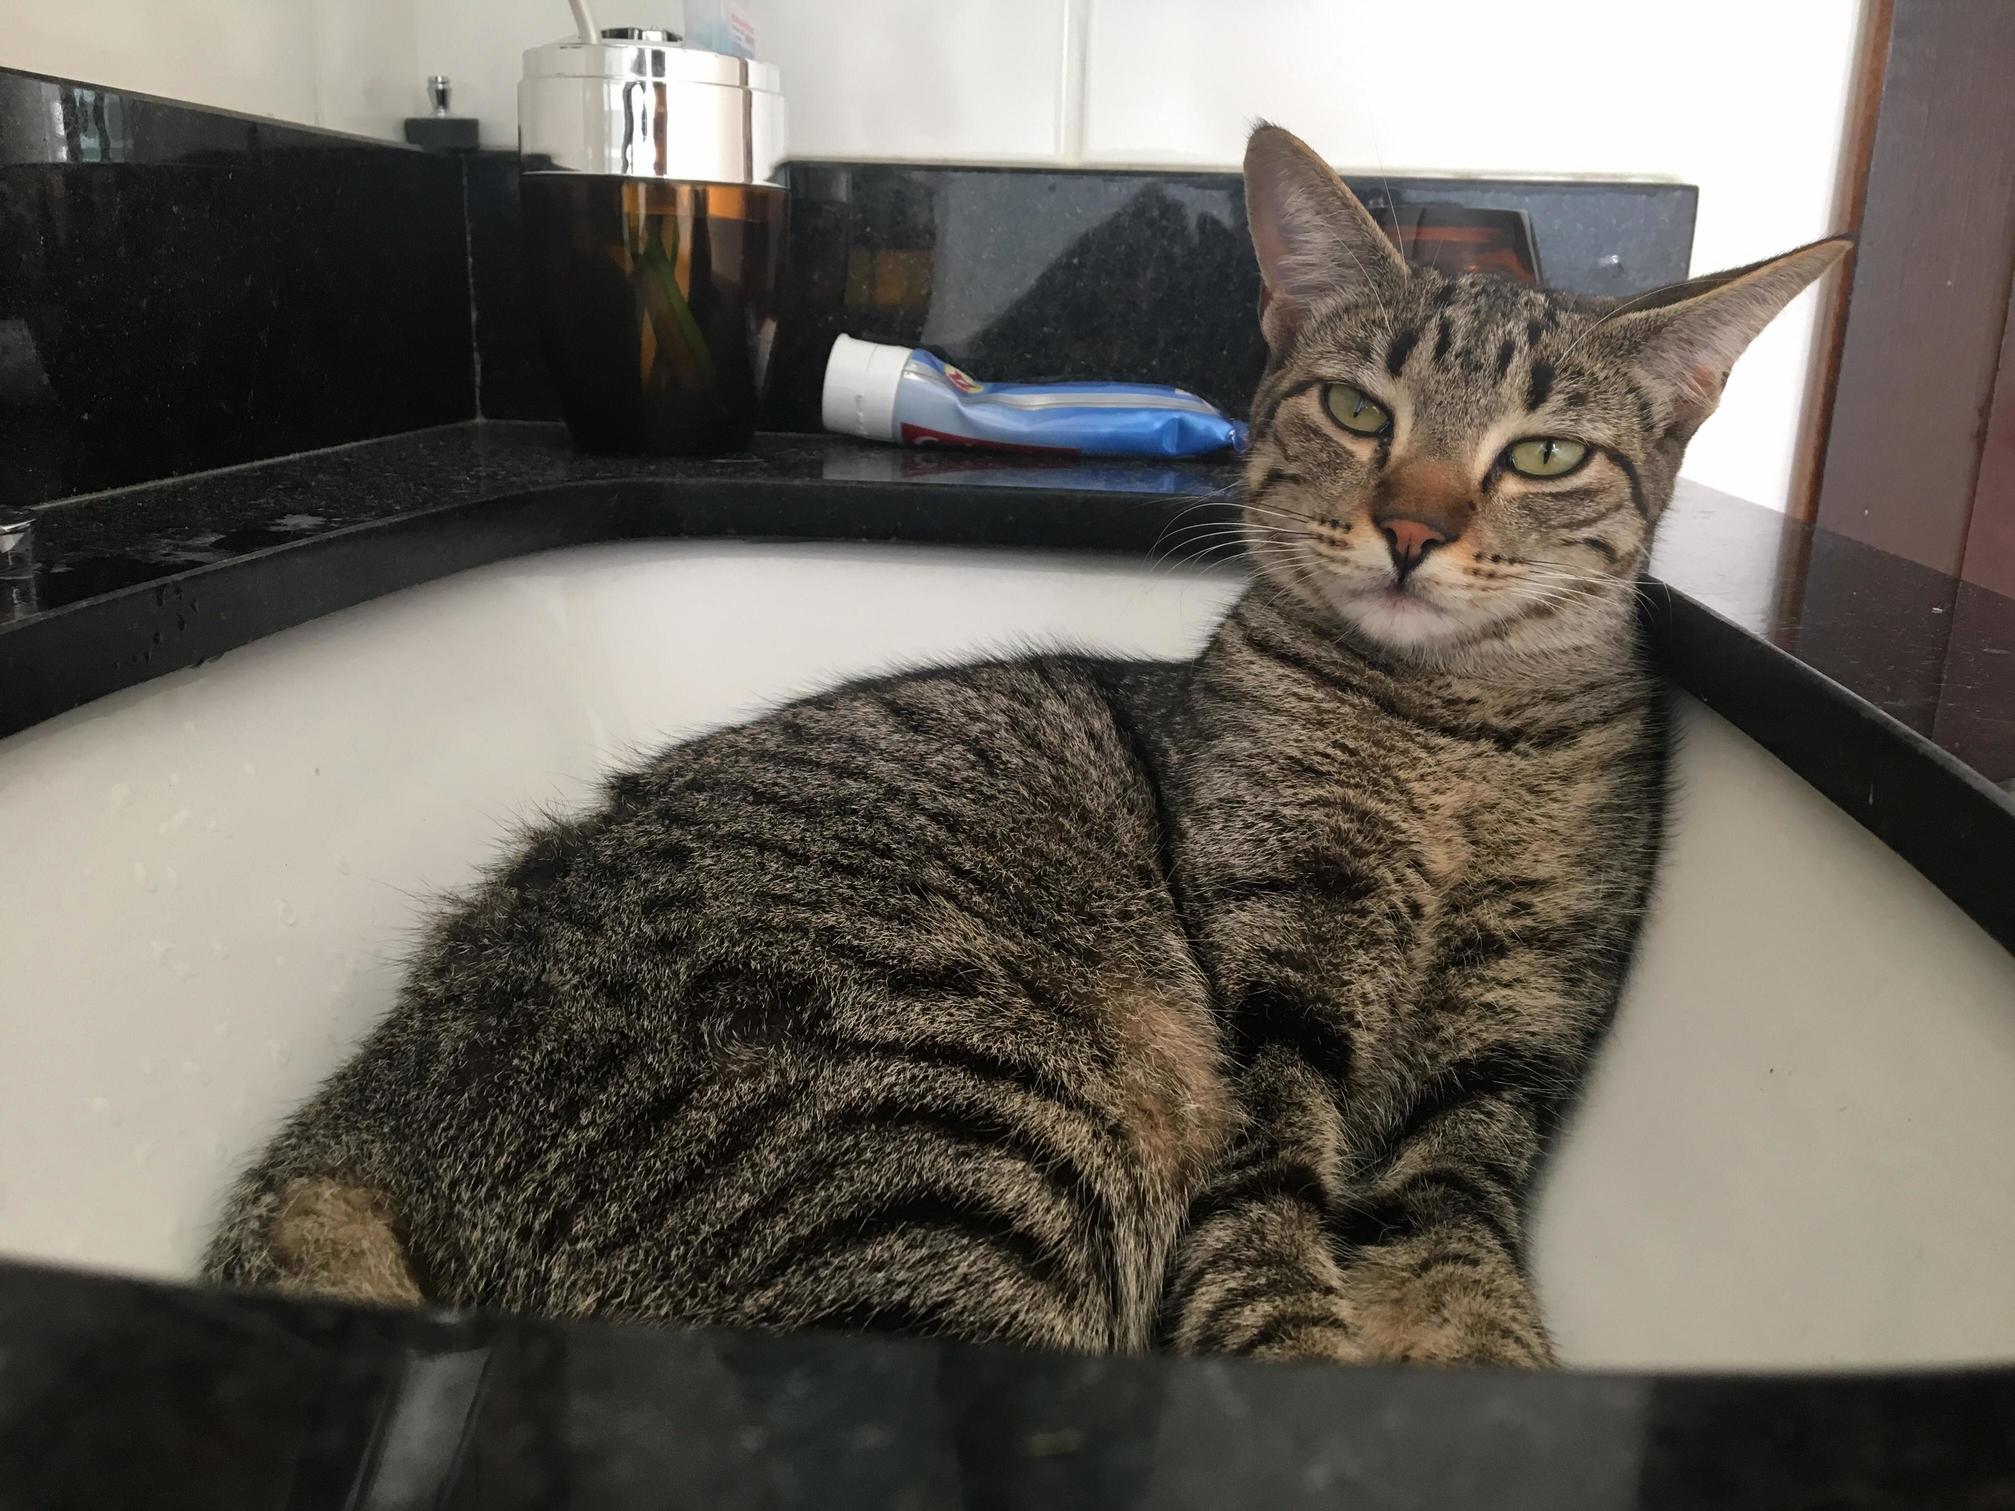 Yeah i was sleeping in the sink. so what